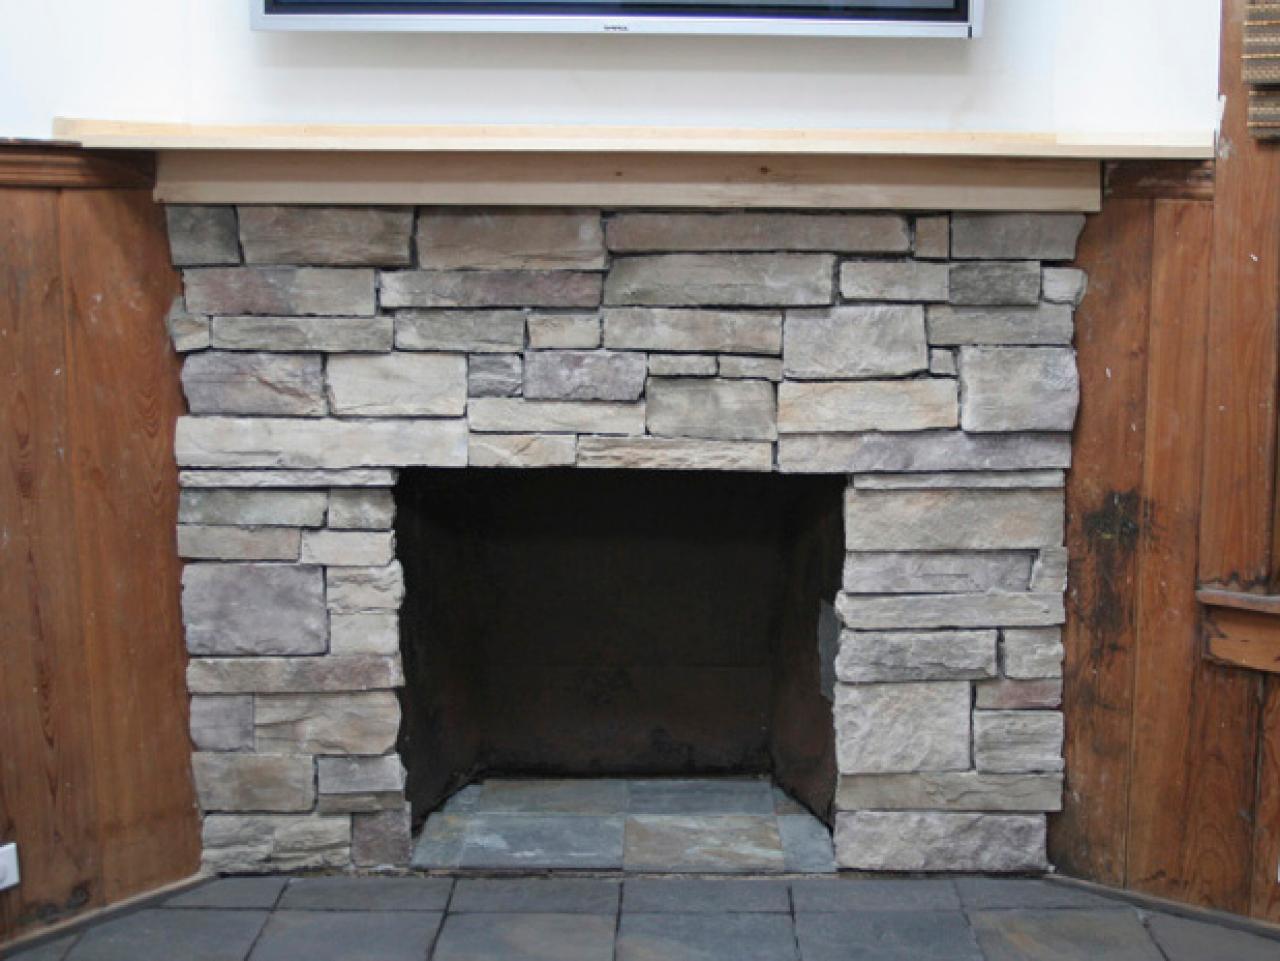 How To Refinish A Brick Fireplace With Stone